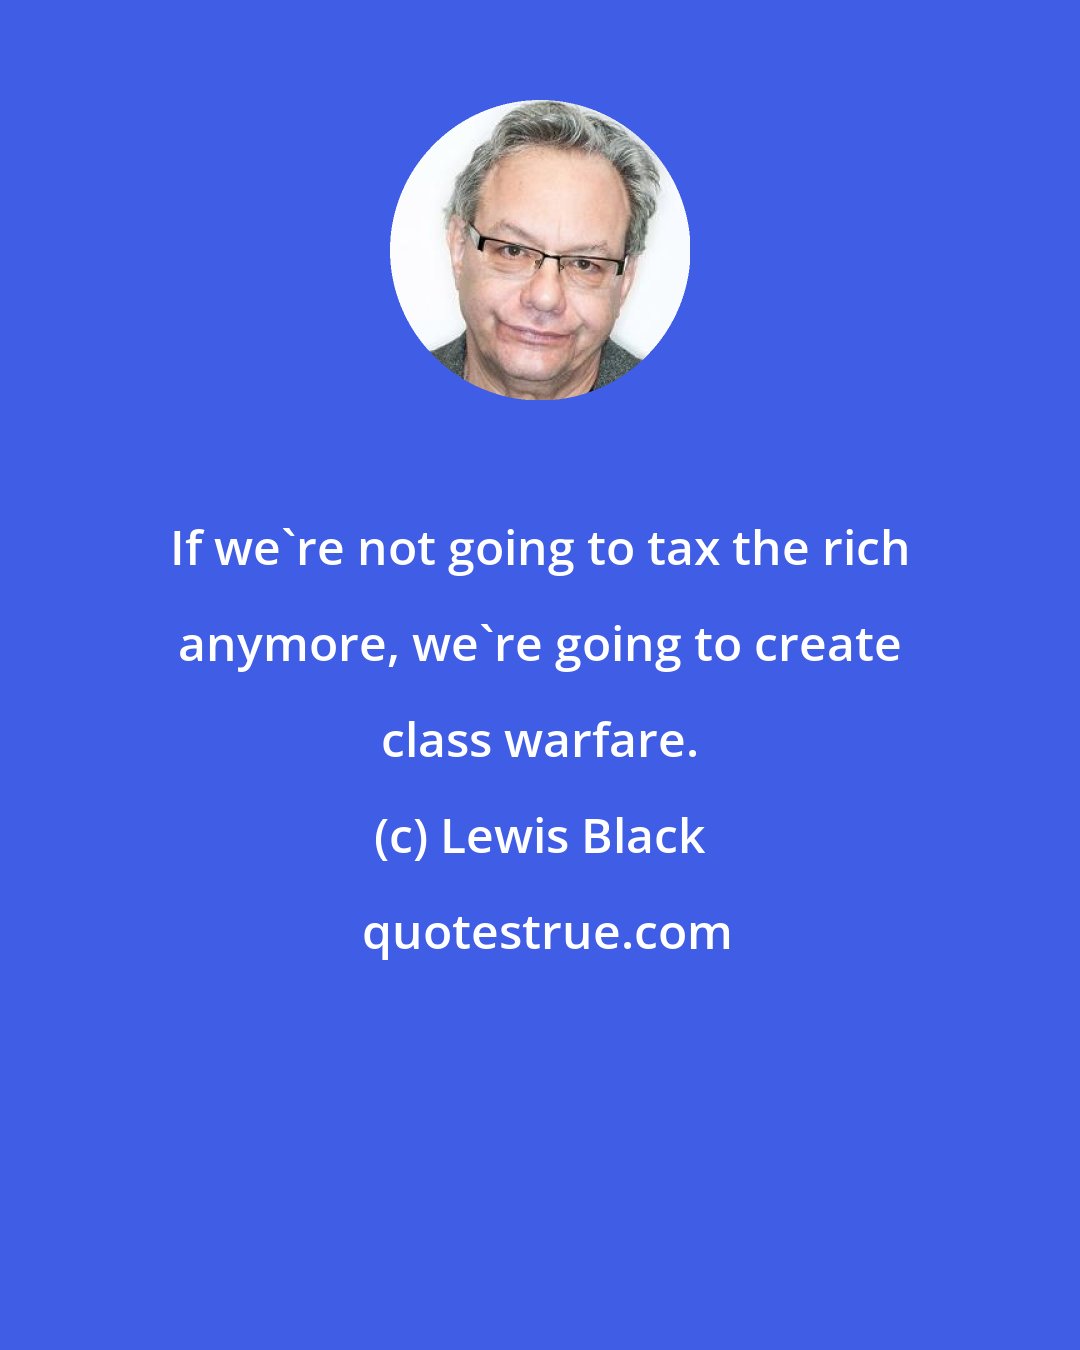 Lewis Black: If we're not going to tax the rich anymore, we're going to create class warfare.